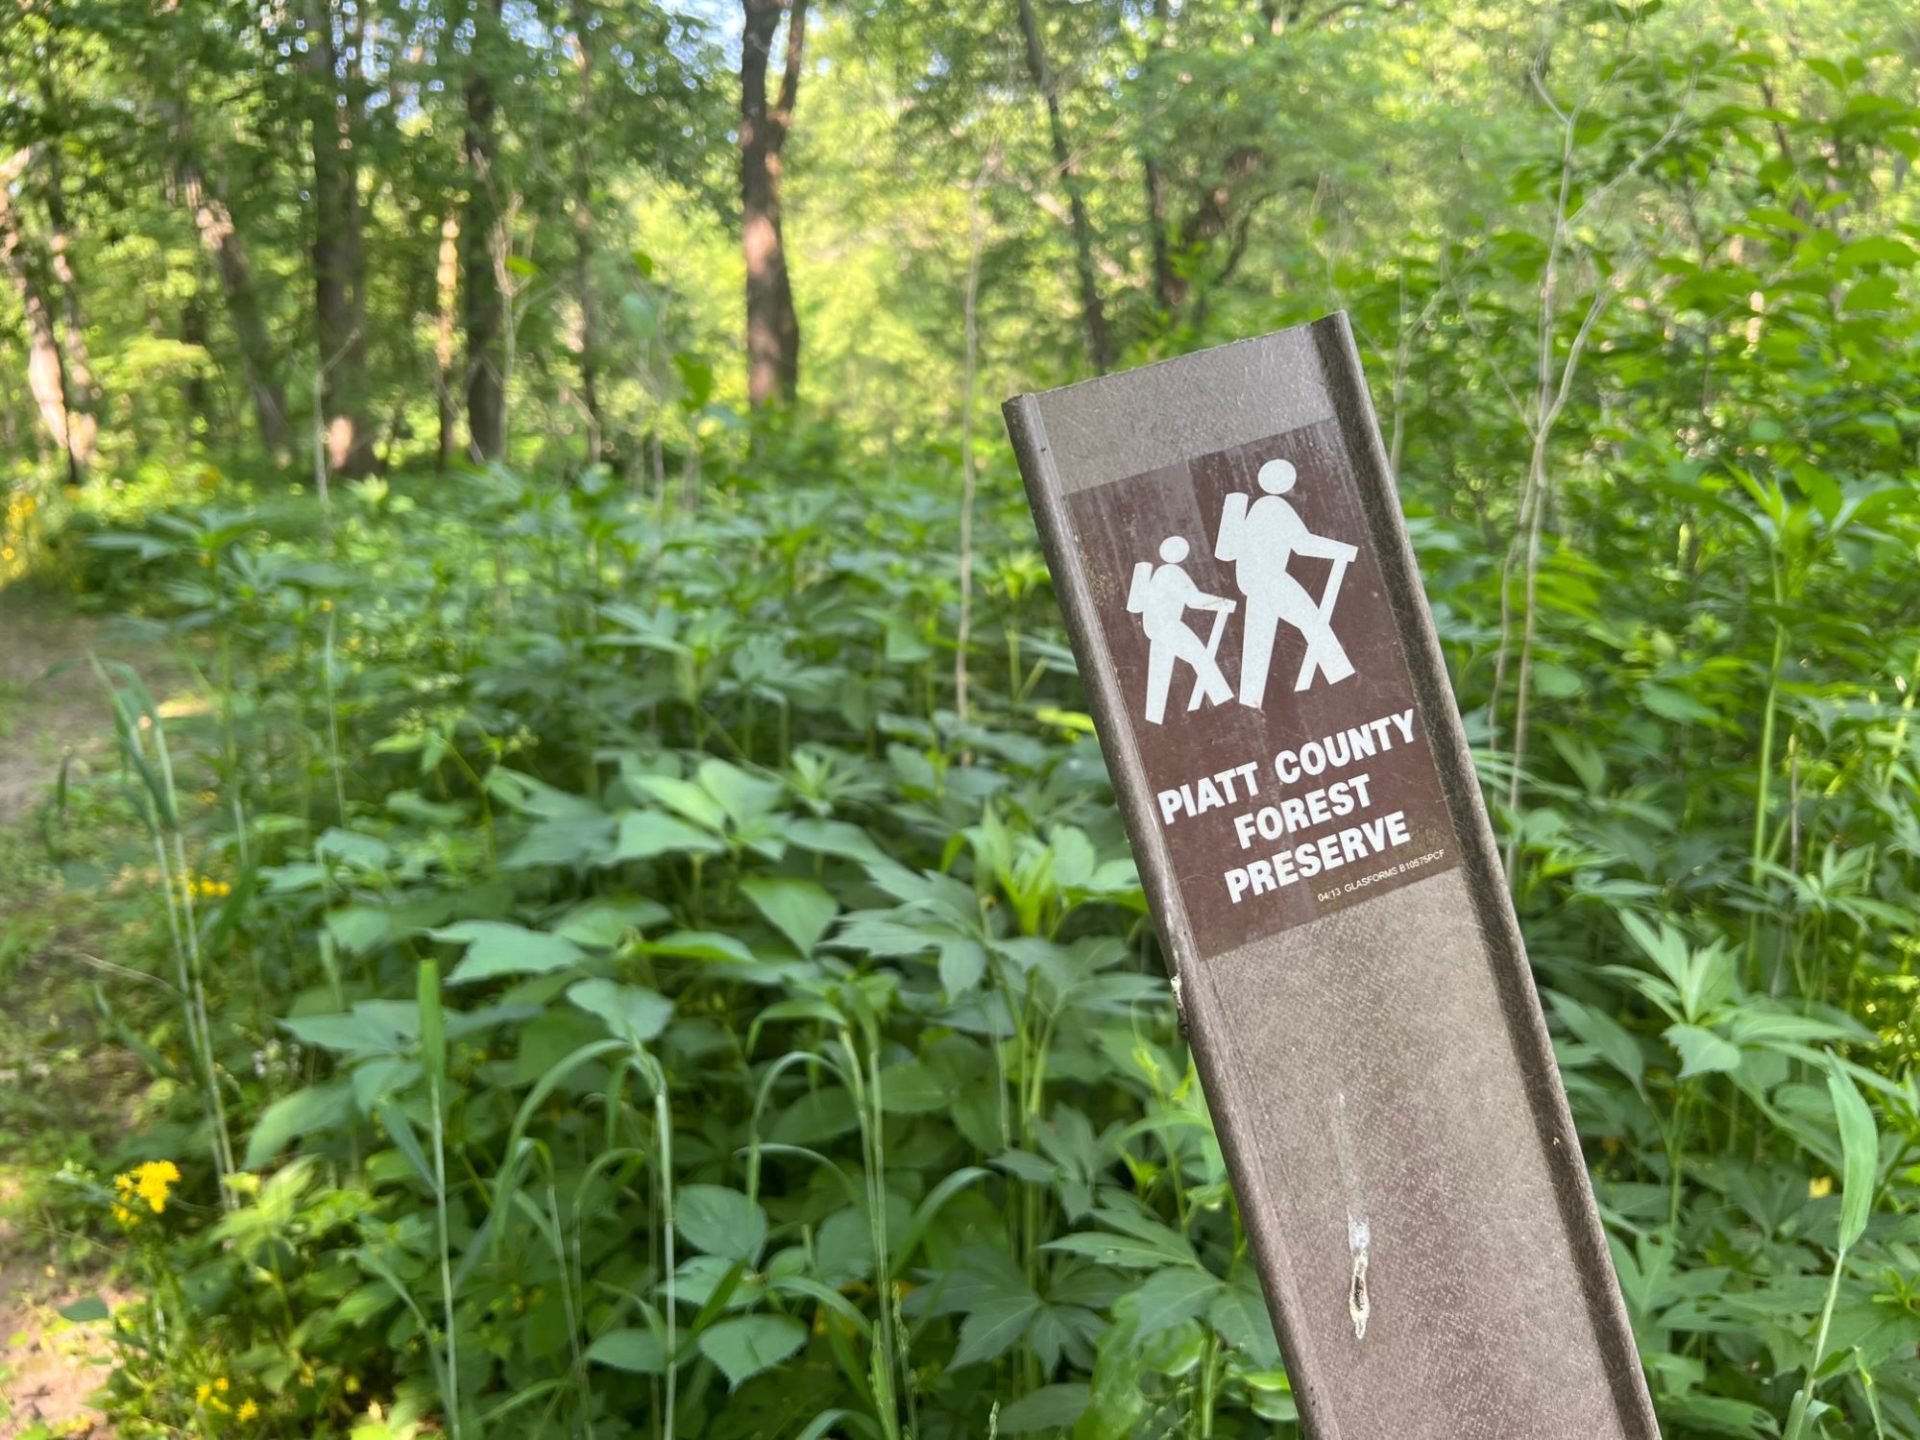 A brown post with an image of two hikers. It says Piatt County Forest Preserve in white letters. Behind the post are green leafy plants.